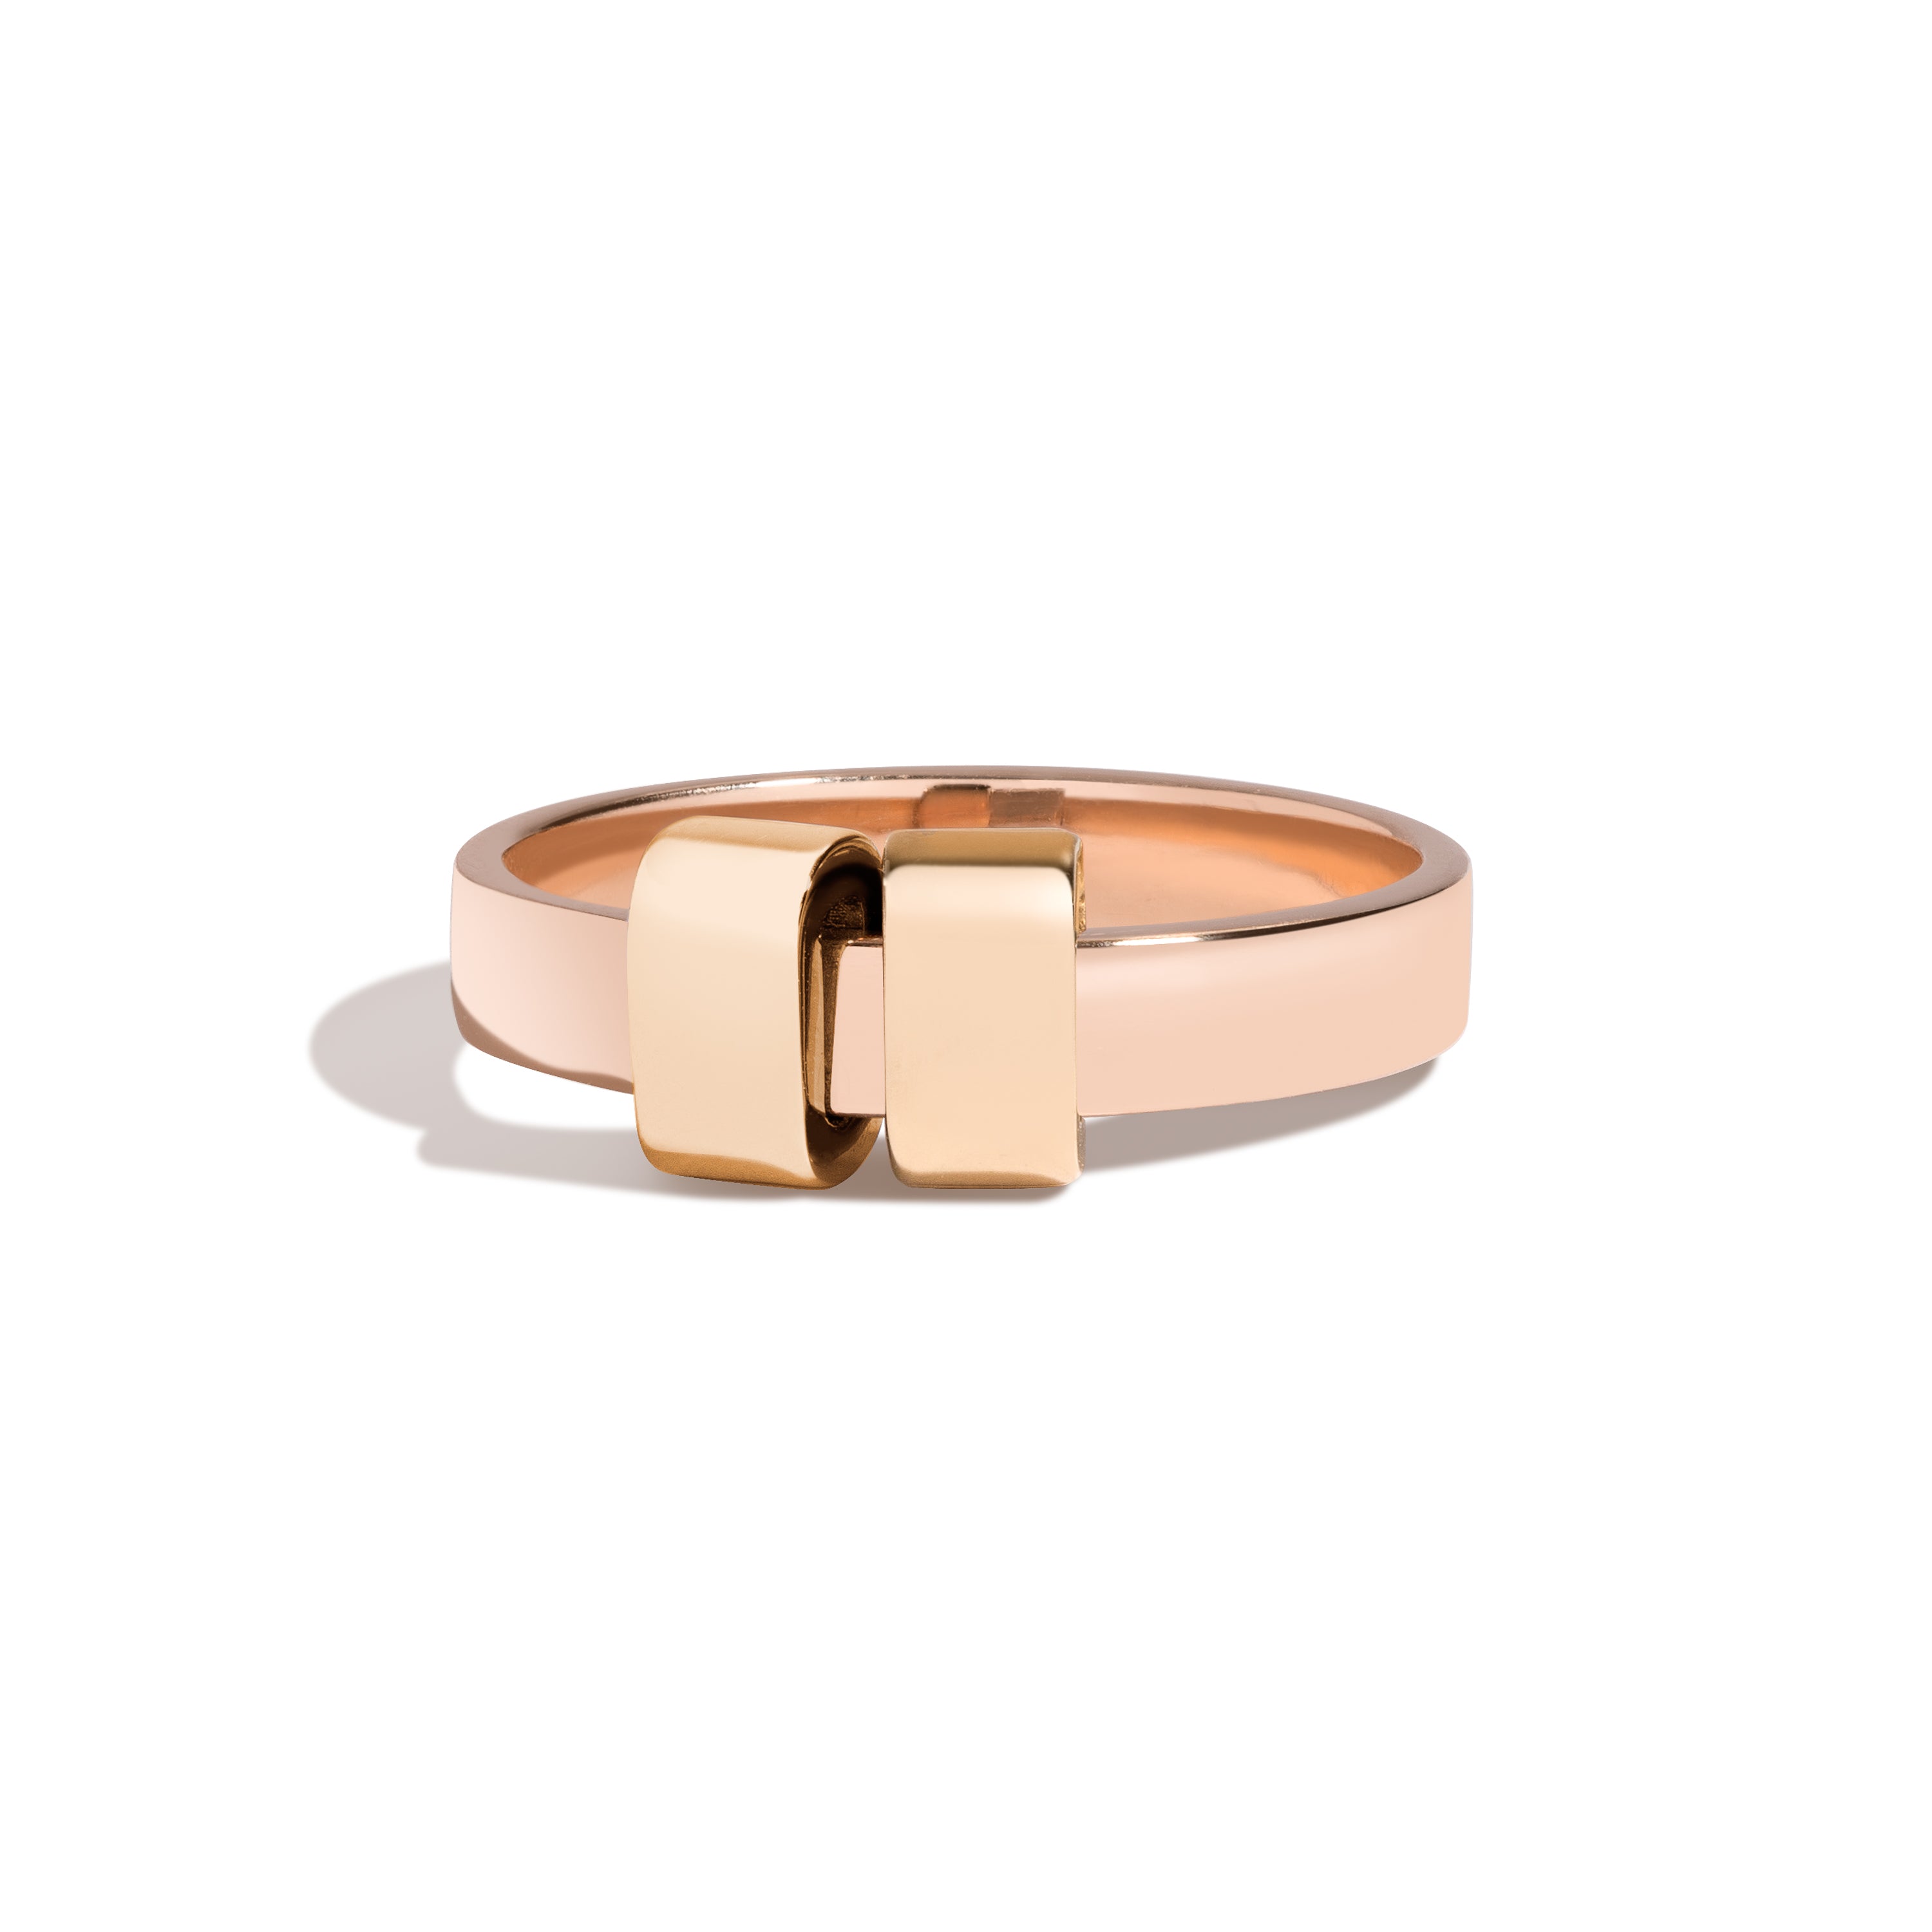 Shahla Karimi Joon Signature 4mm 14K Rose Gold Band With 2 14K Yellow Gold Wraps